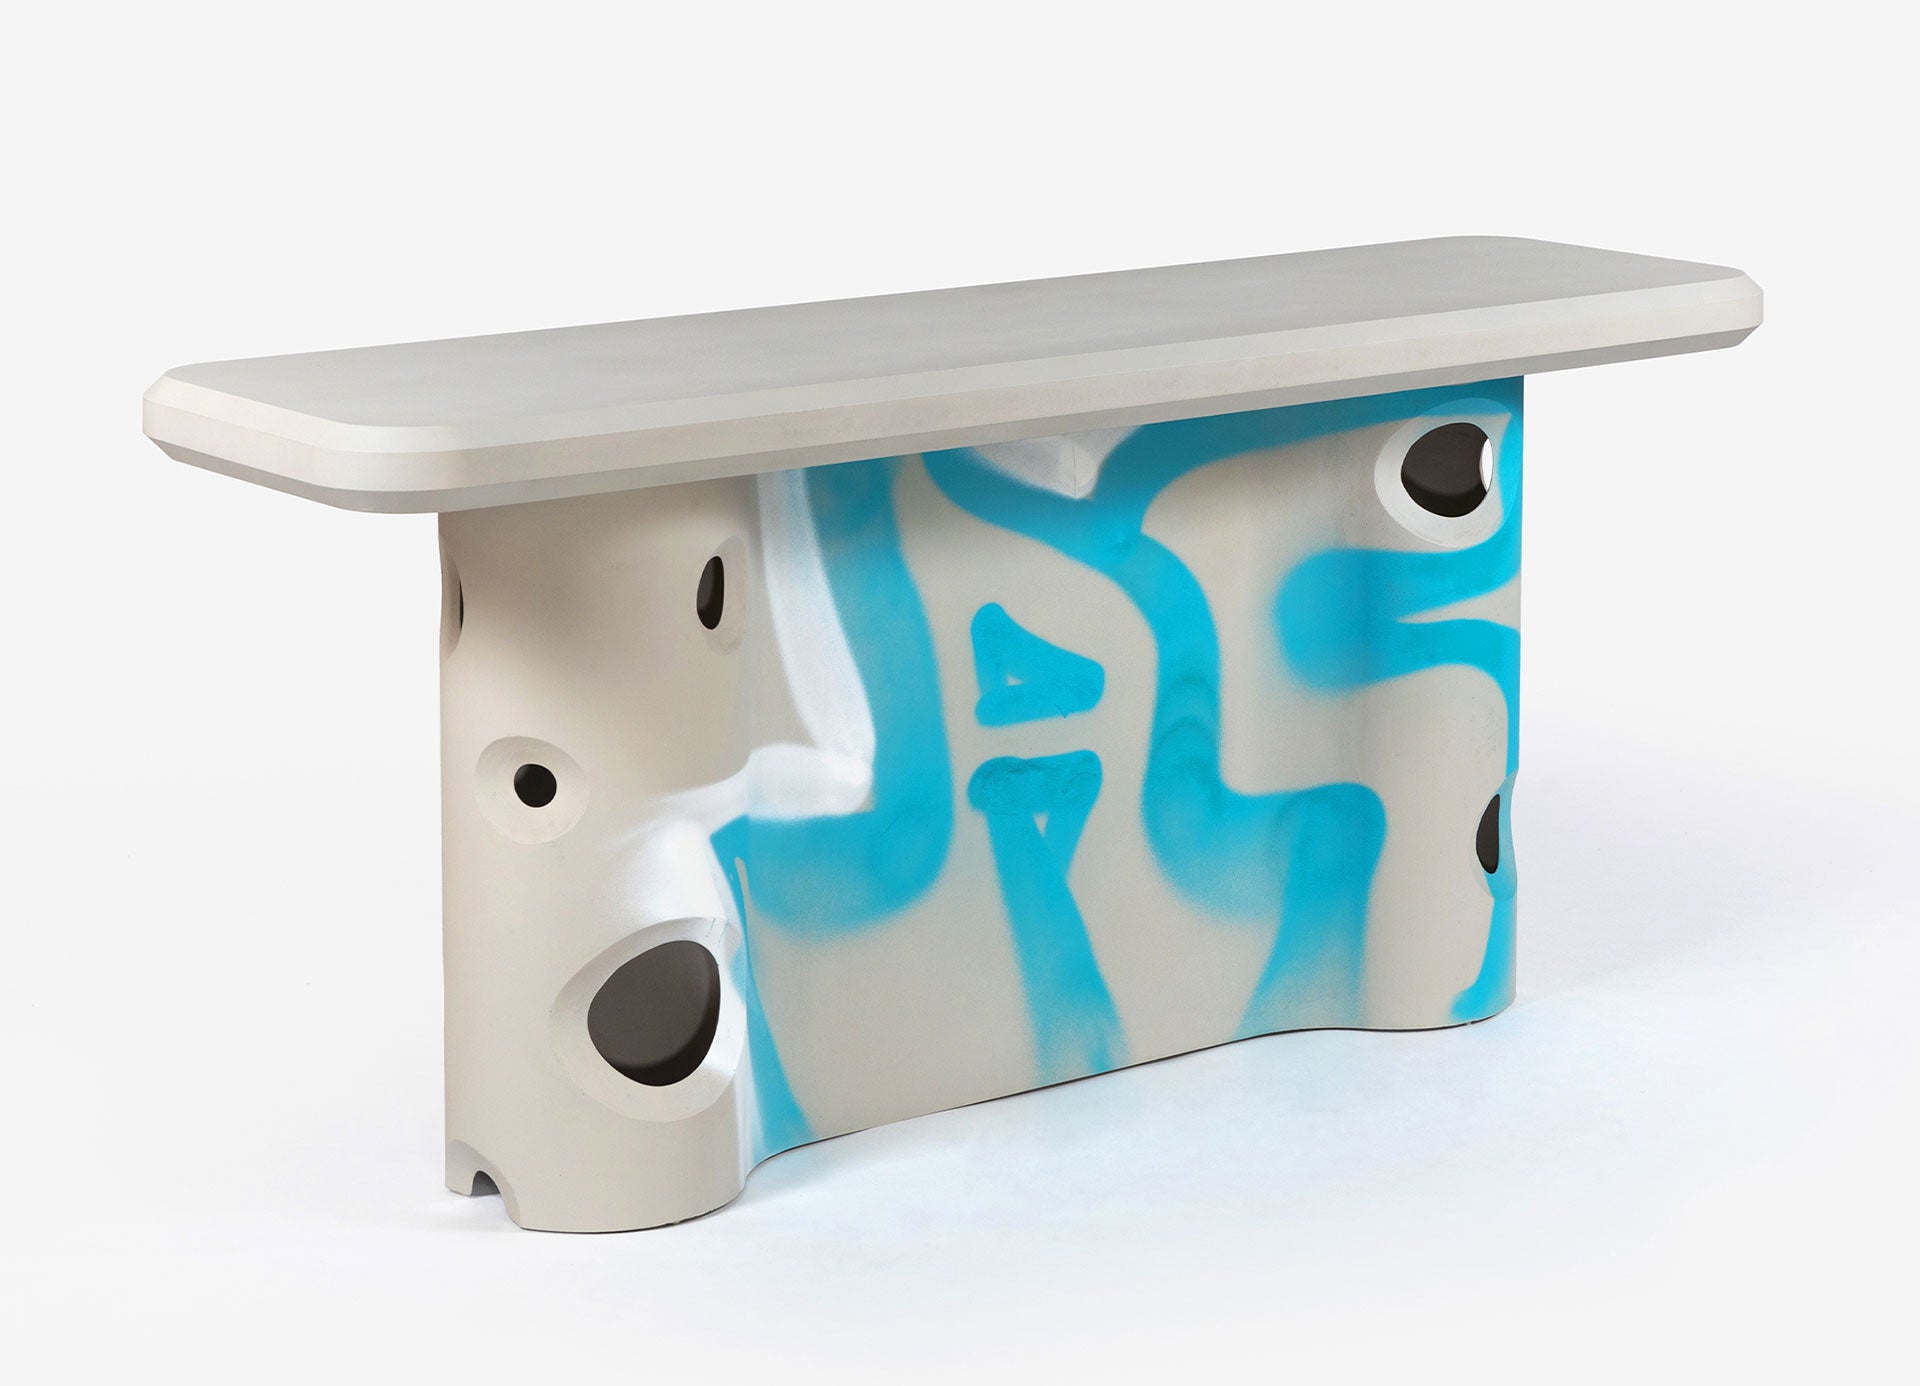 Efflorescence Console/ Virgil Abloh, 2020/ Concrete and resin with hand-painted graffiti/ Courtesy of Galerie kreo, Alexandra de Cossette